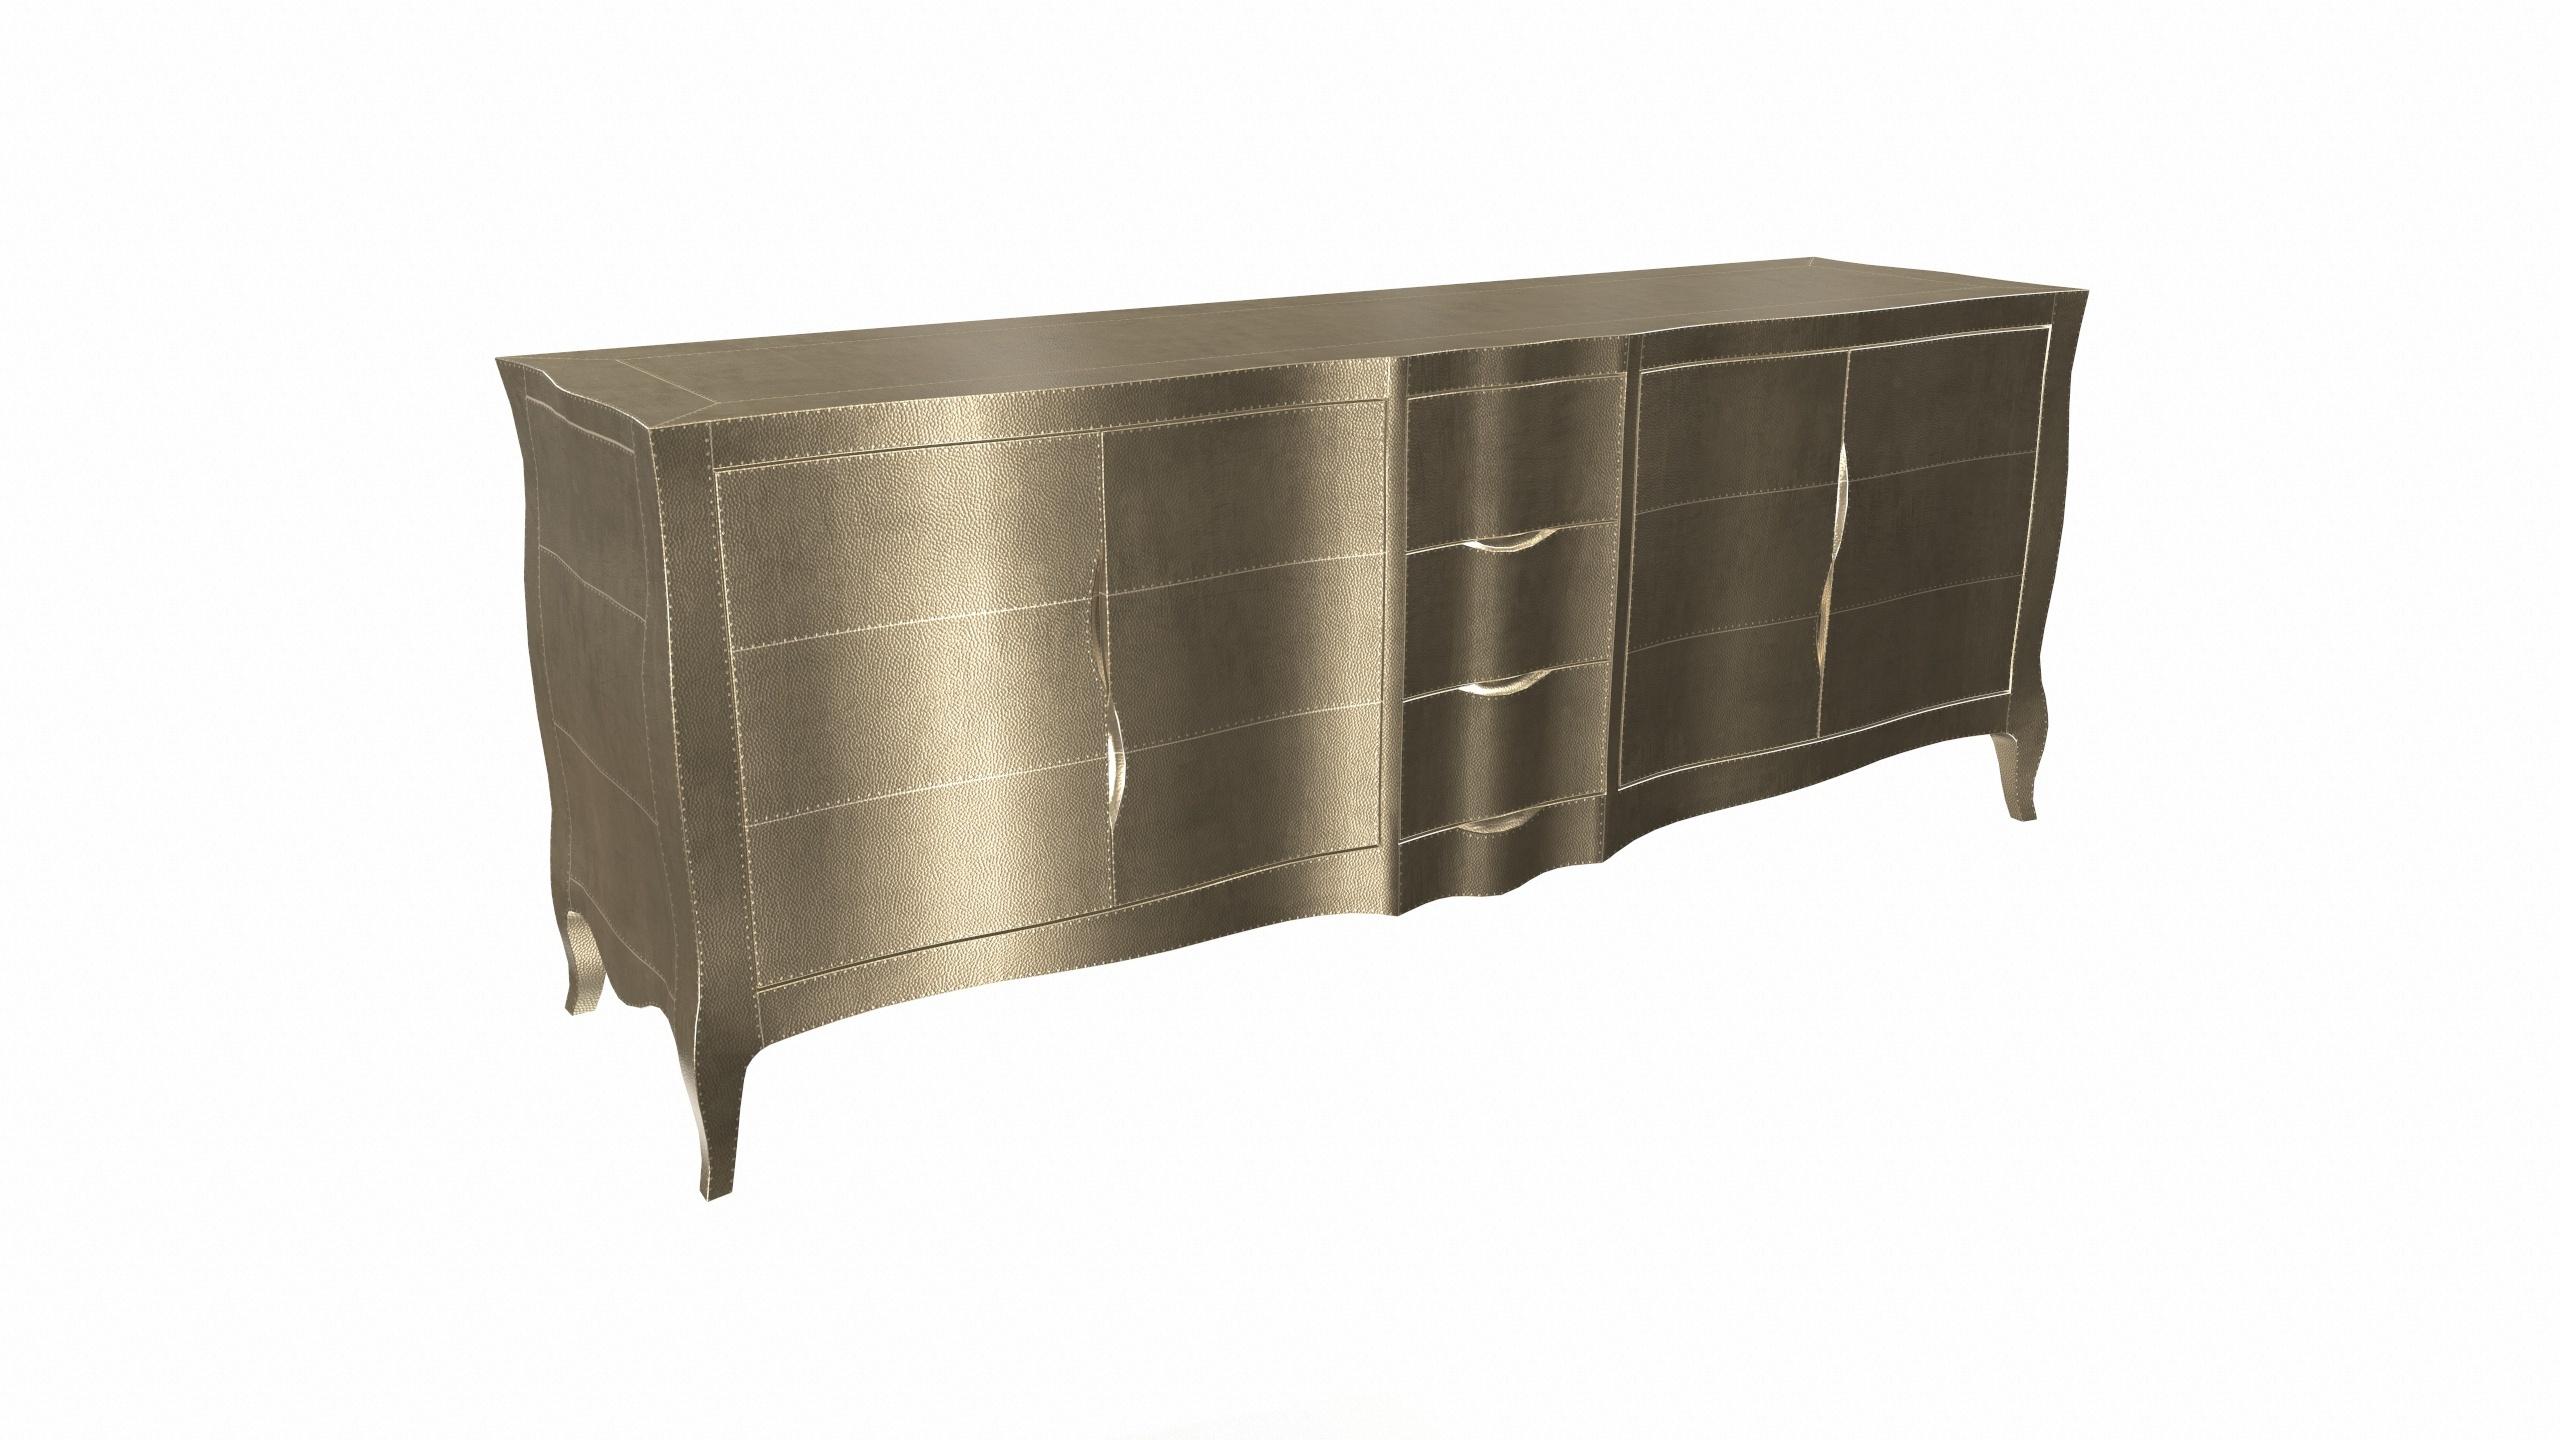 Contemporary Louise Credenza Art Deco Cupboards in Mid. Hammered Brass by Paul Mathieu For Sale